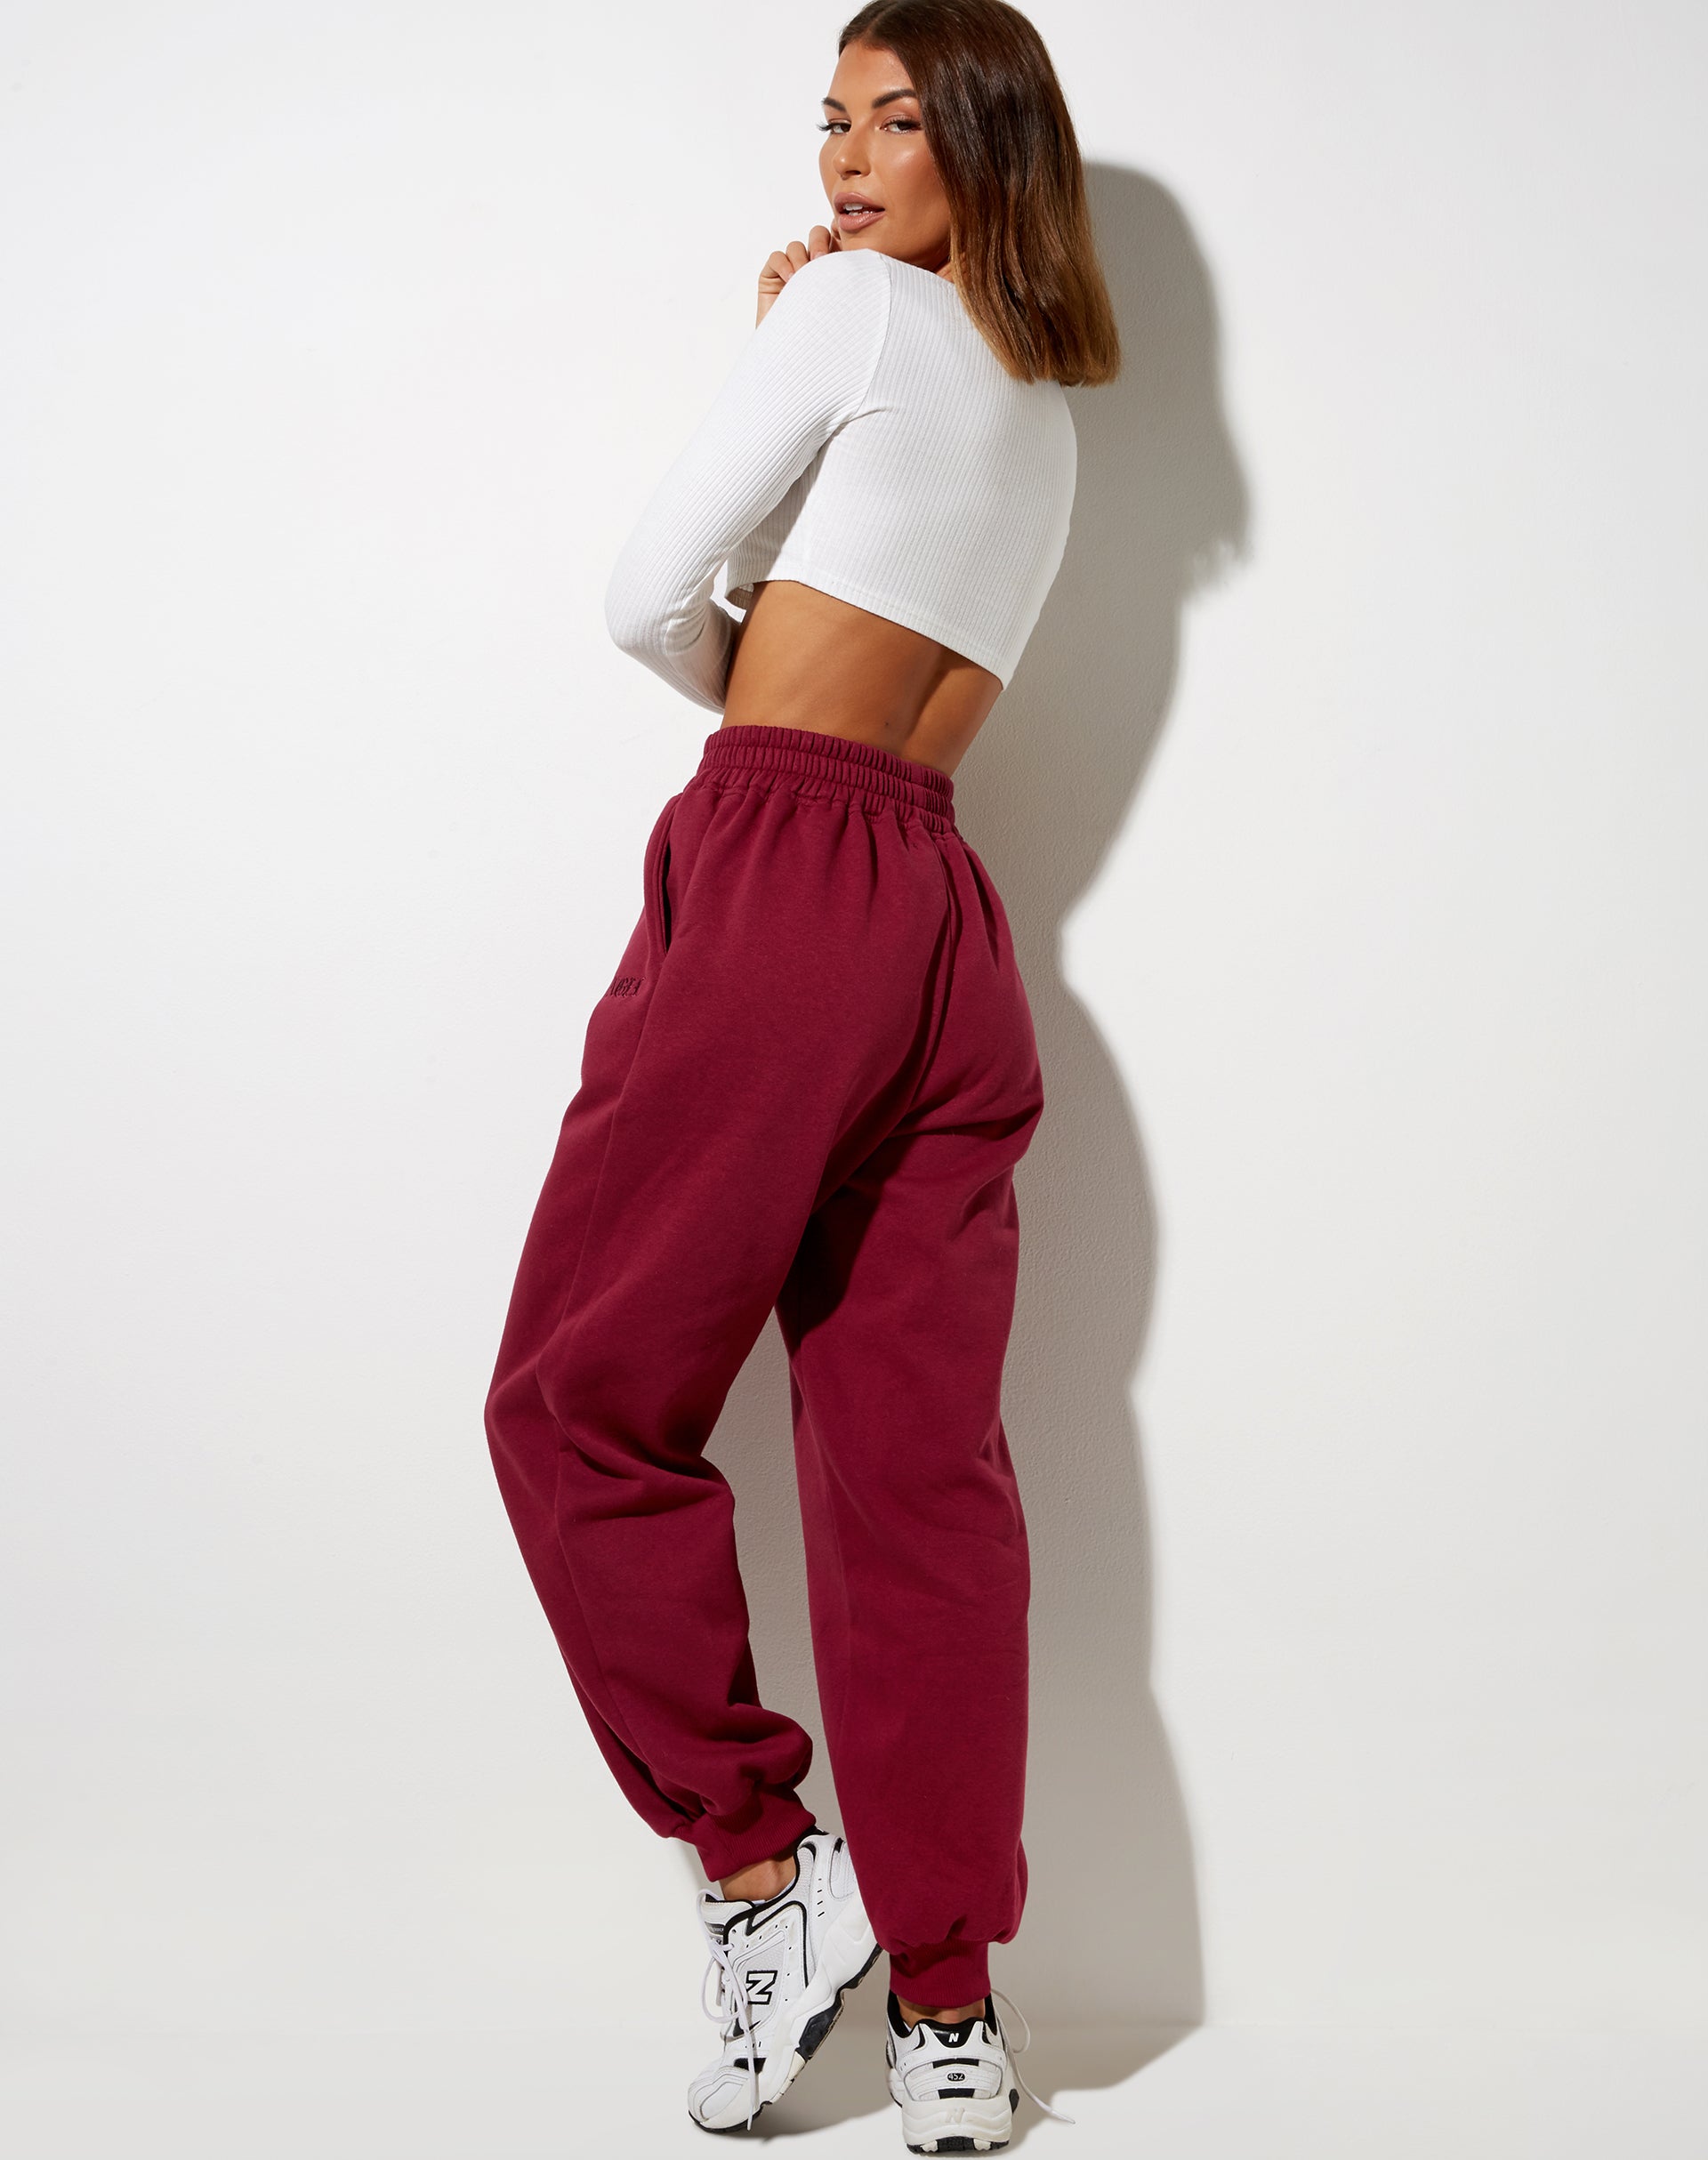 Image of Roider Jogger in Burgundy Angel Embro